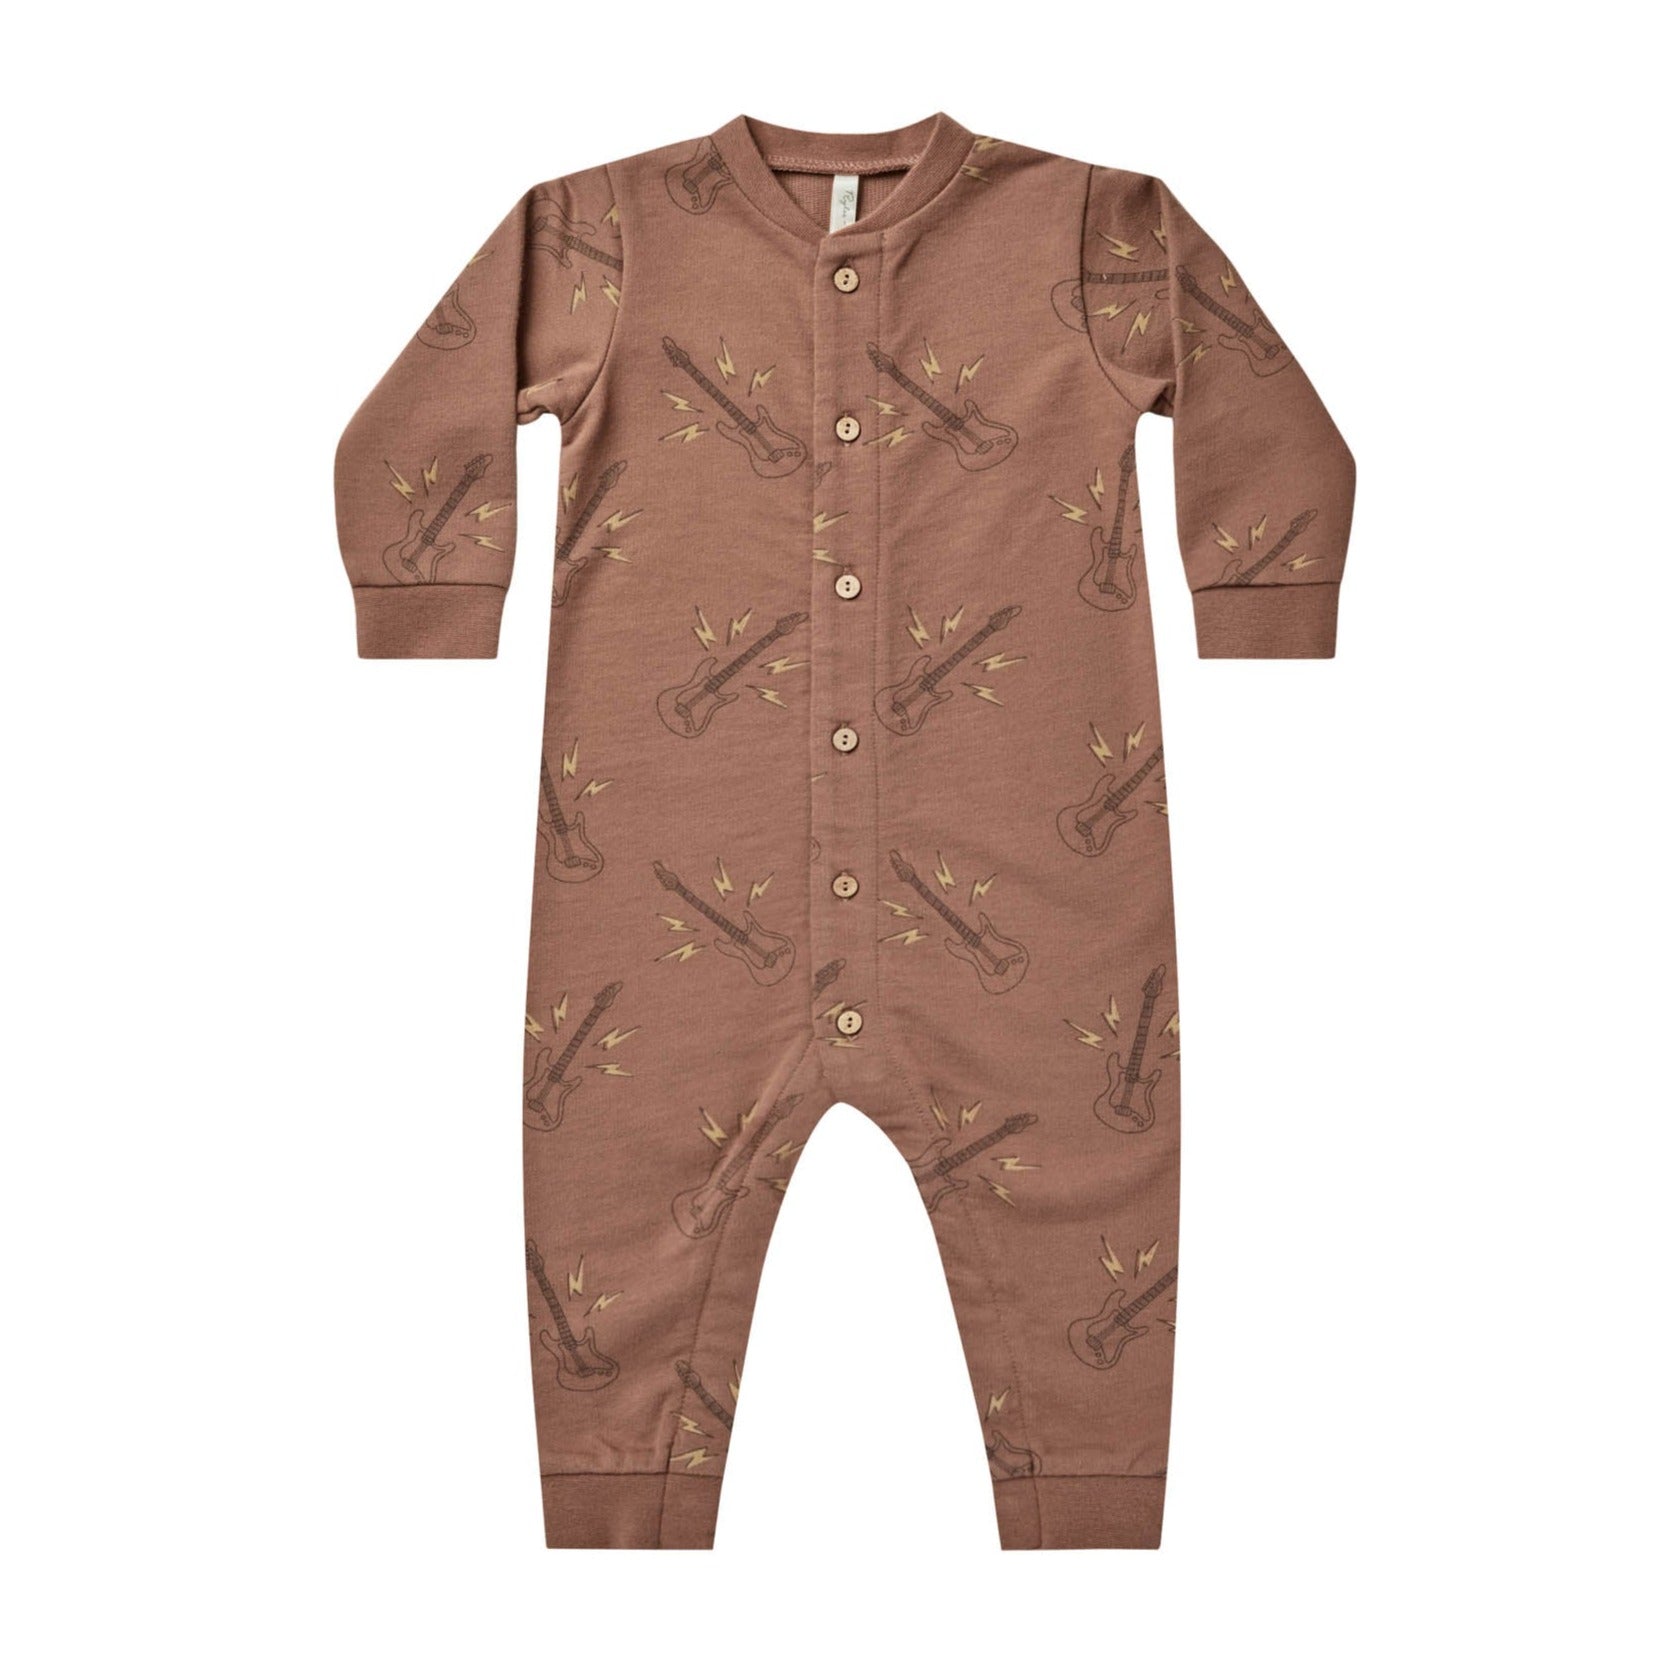 Rylee and Cru Guitars Baby Jumpsuit at Bonjour Baby Baskets